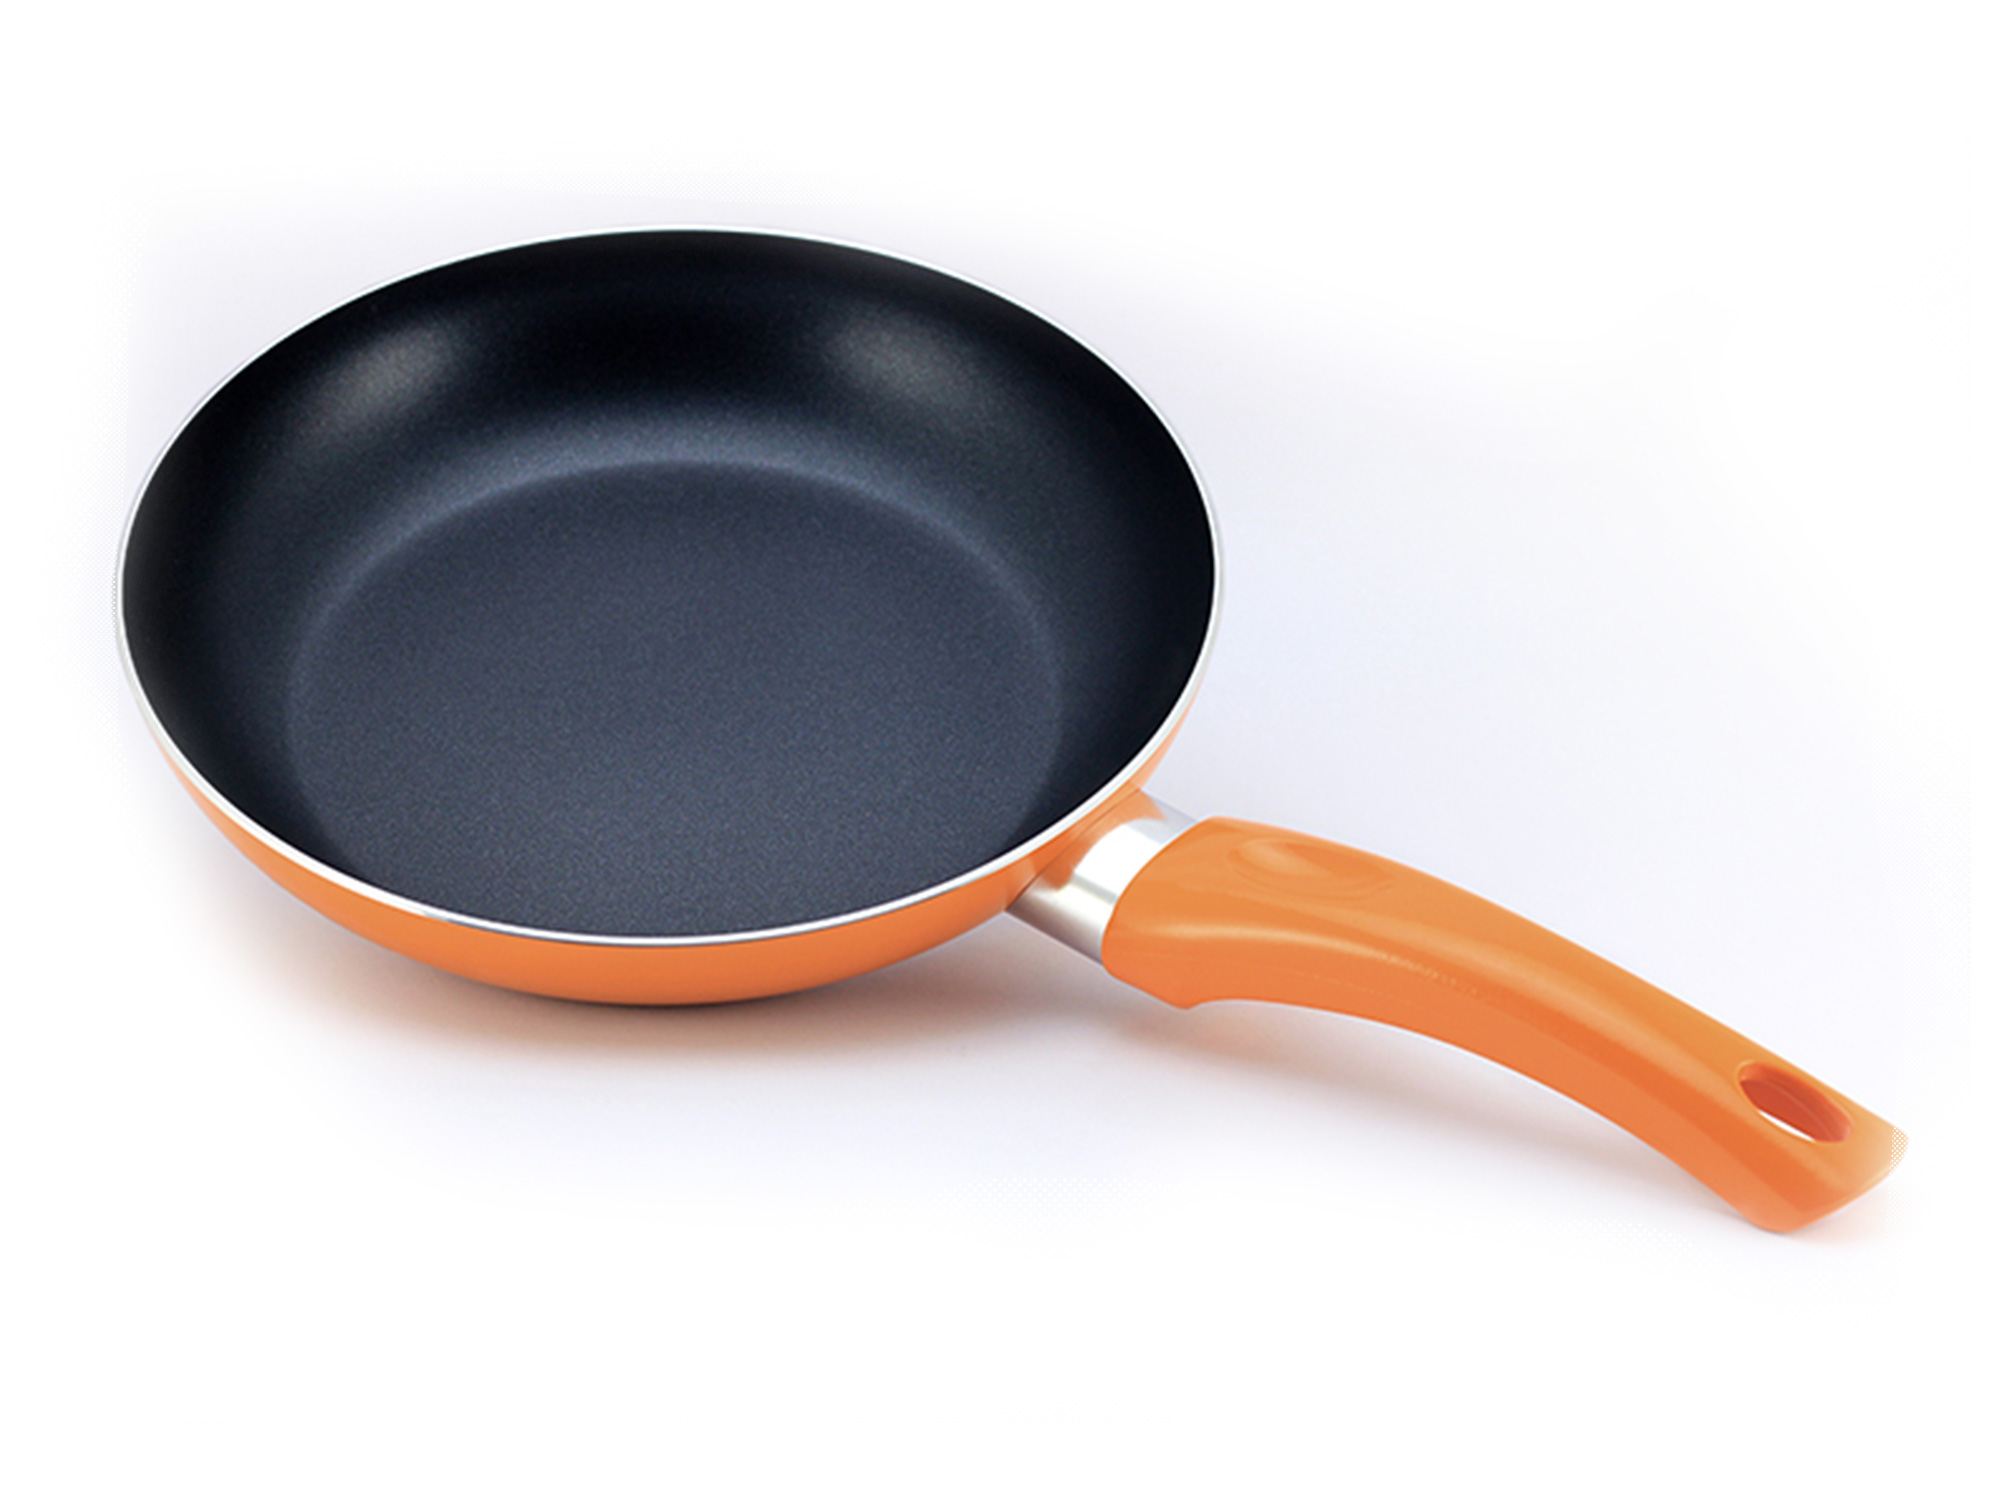 Are Non-Stick Pans Still Coated with Teflon?